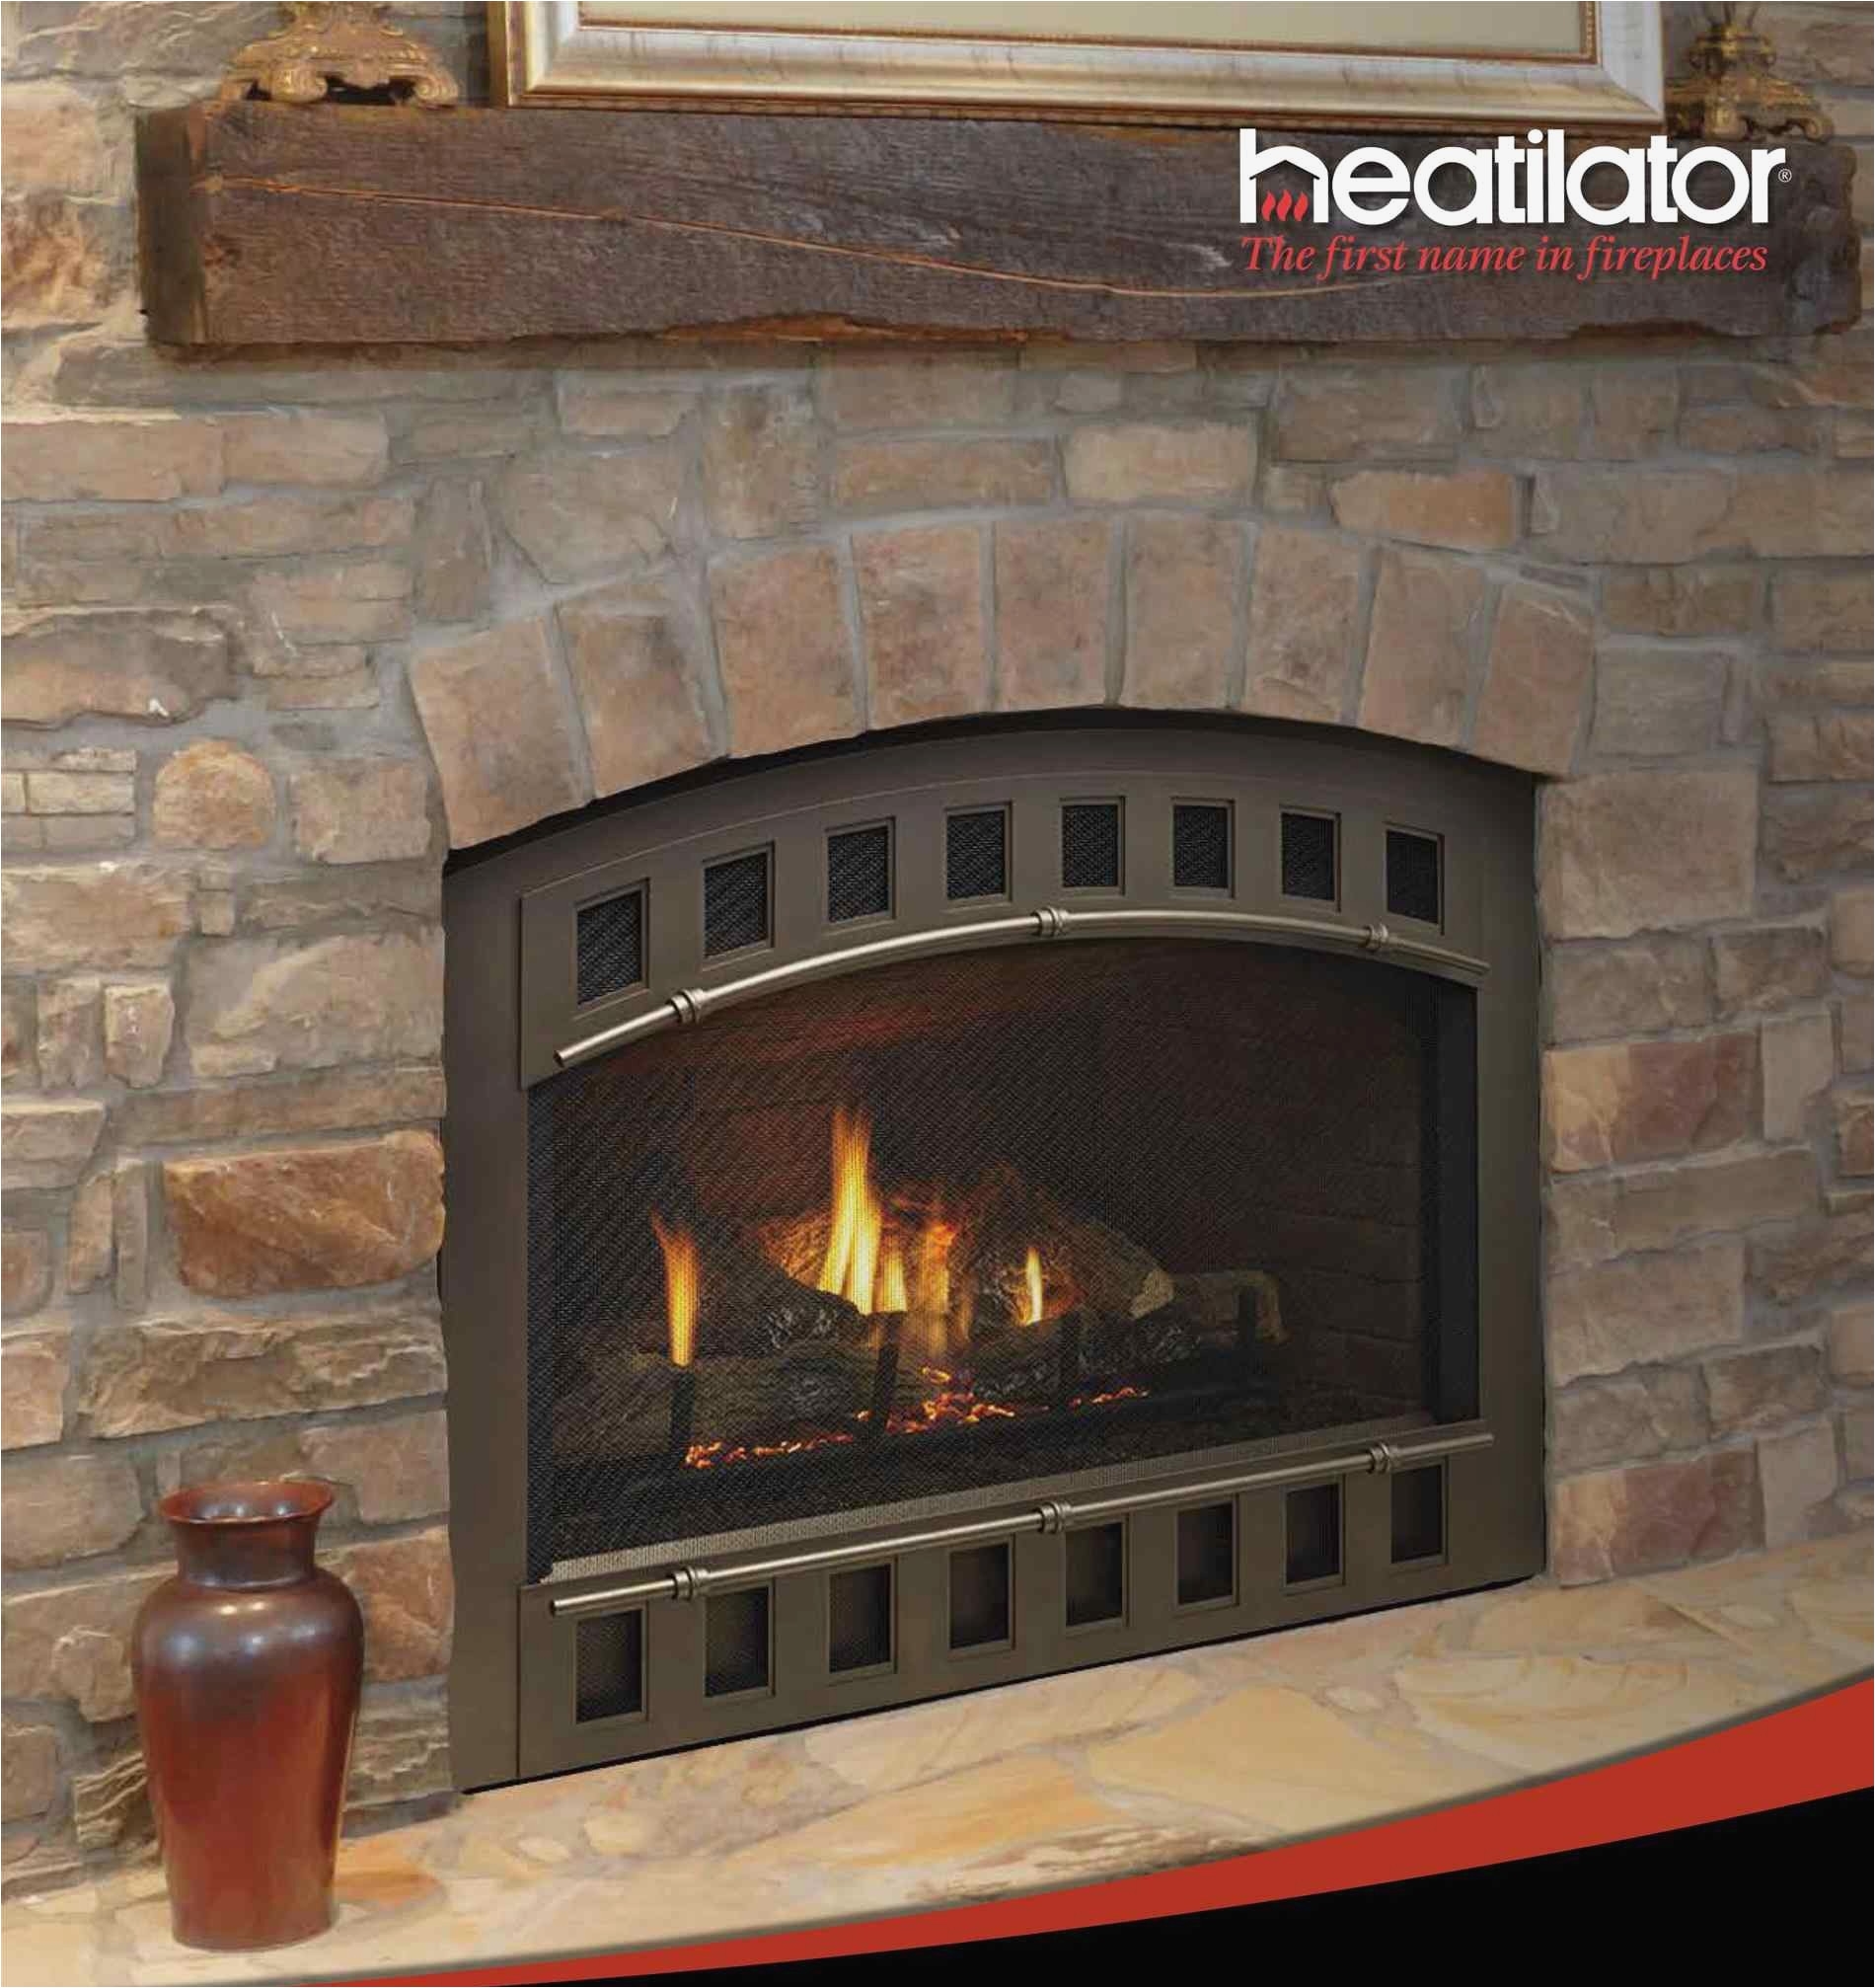 best ideas of gas fireplace the cozy cabin lennox hearth parts store also charming lennox gas